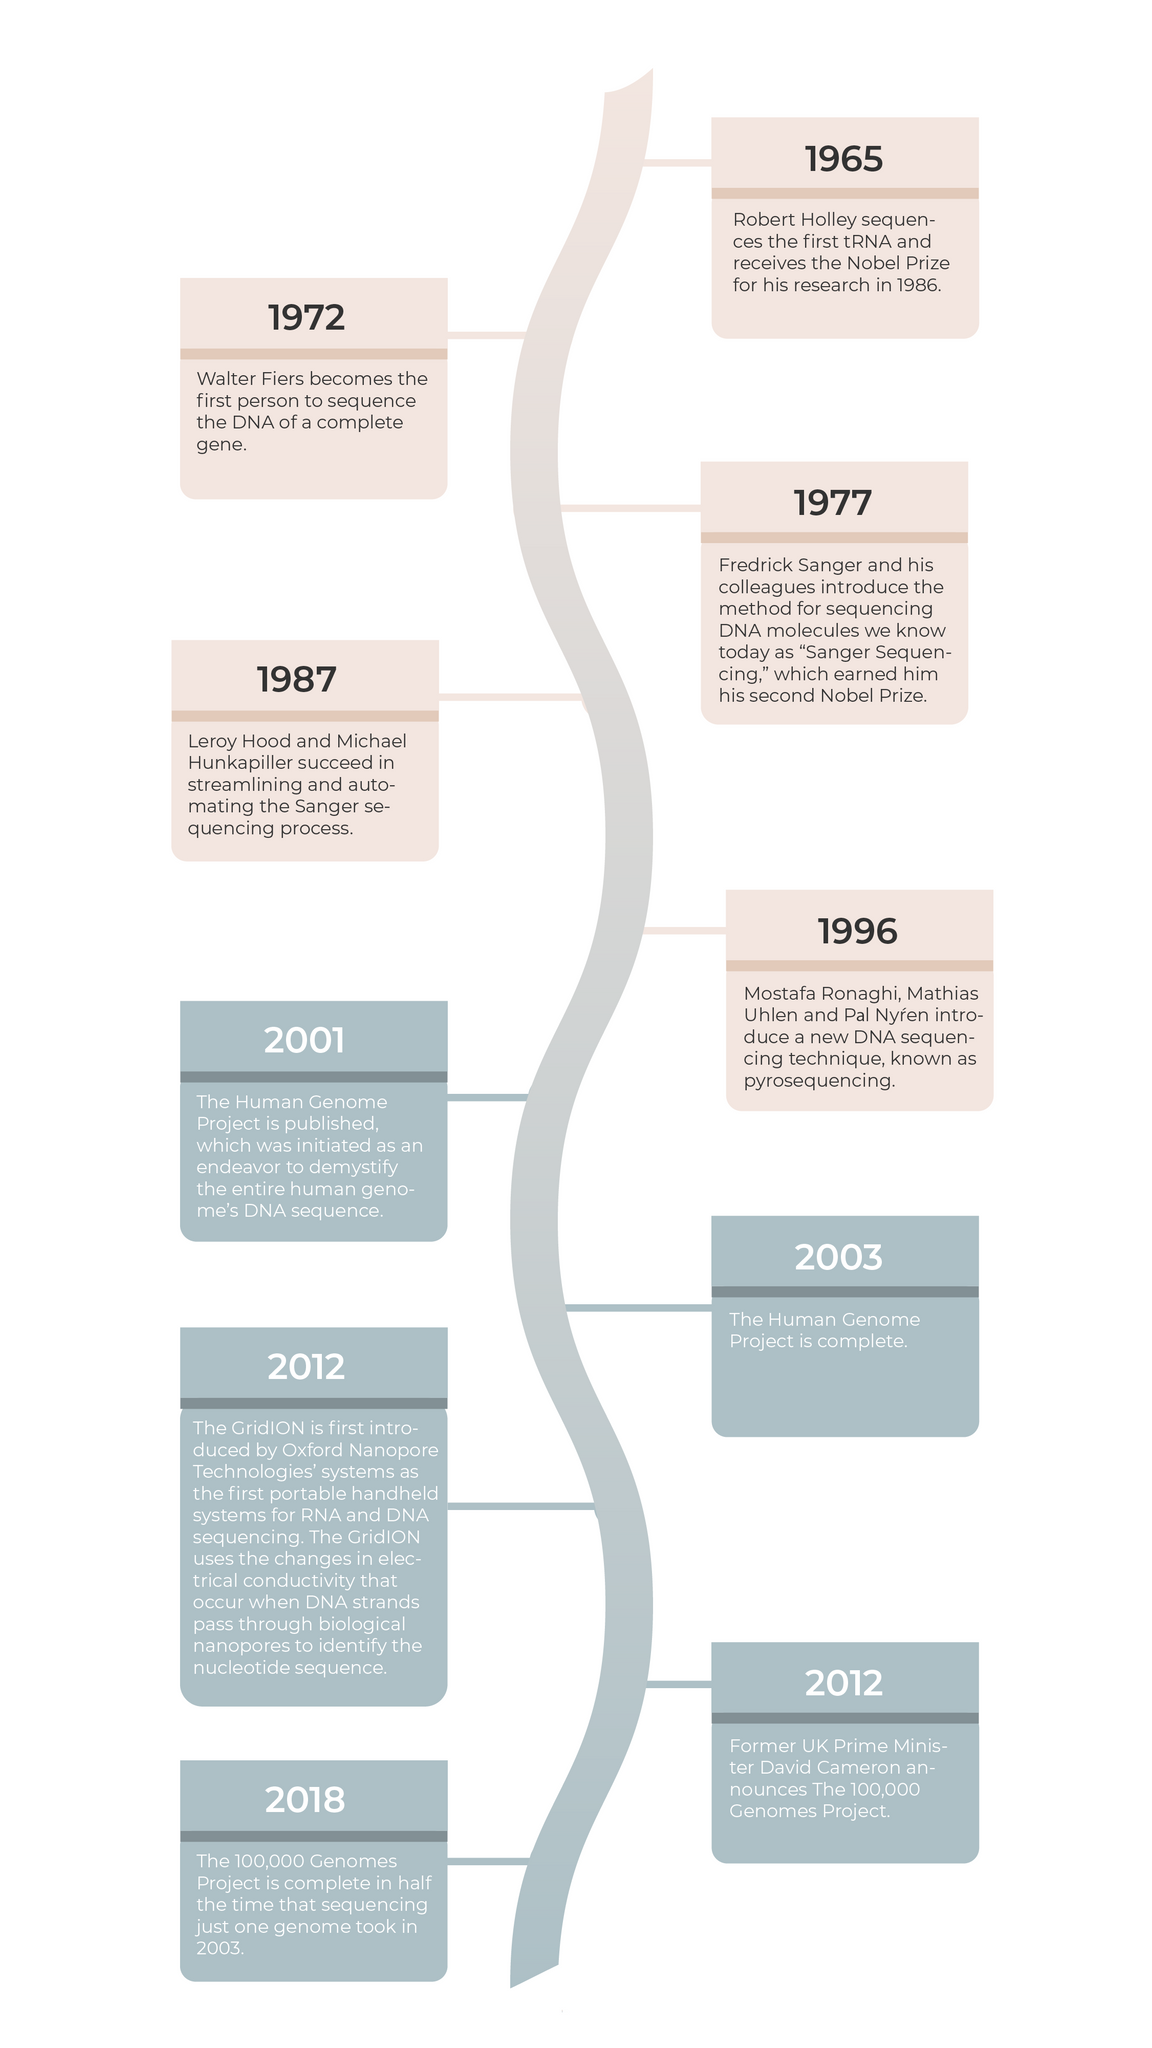 Timeline of DNA sequencing technology breakthroughs